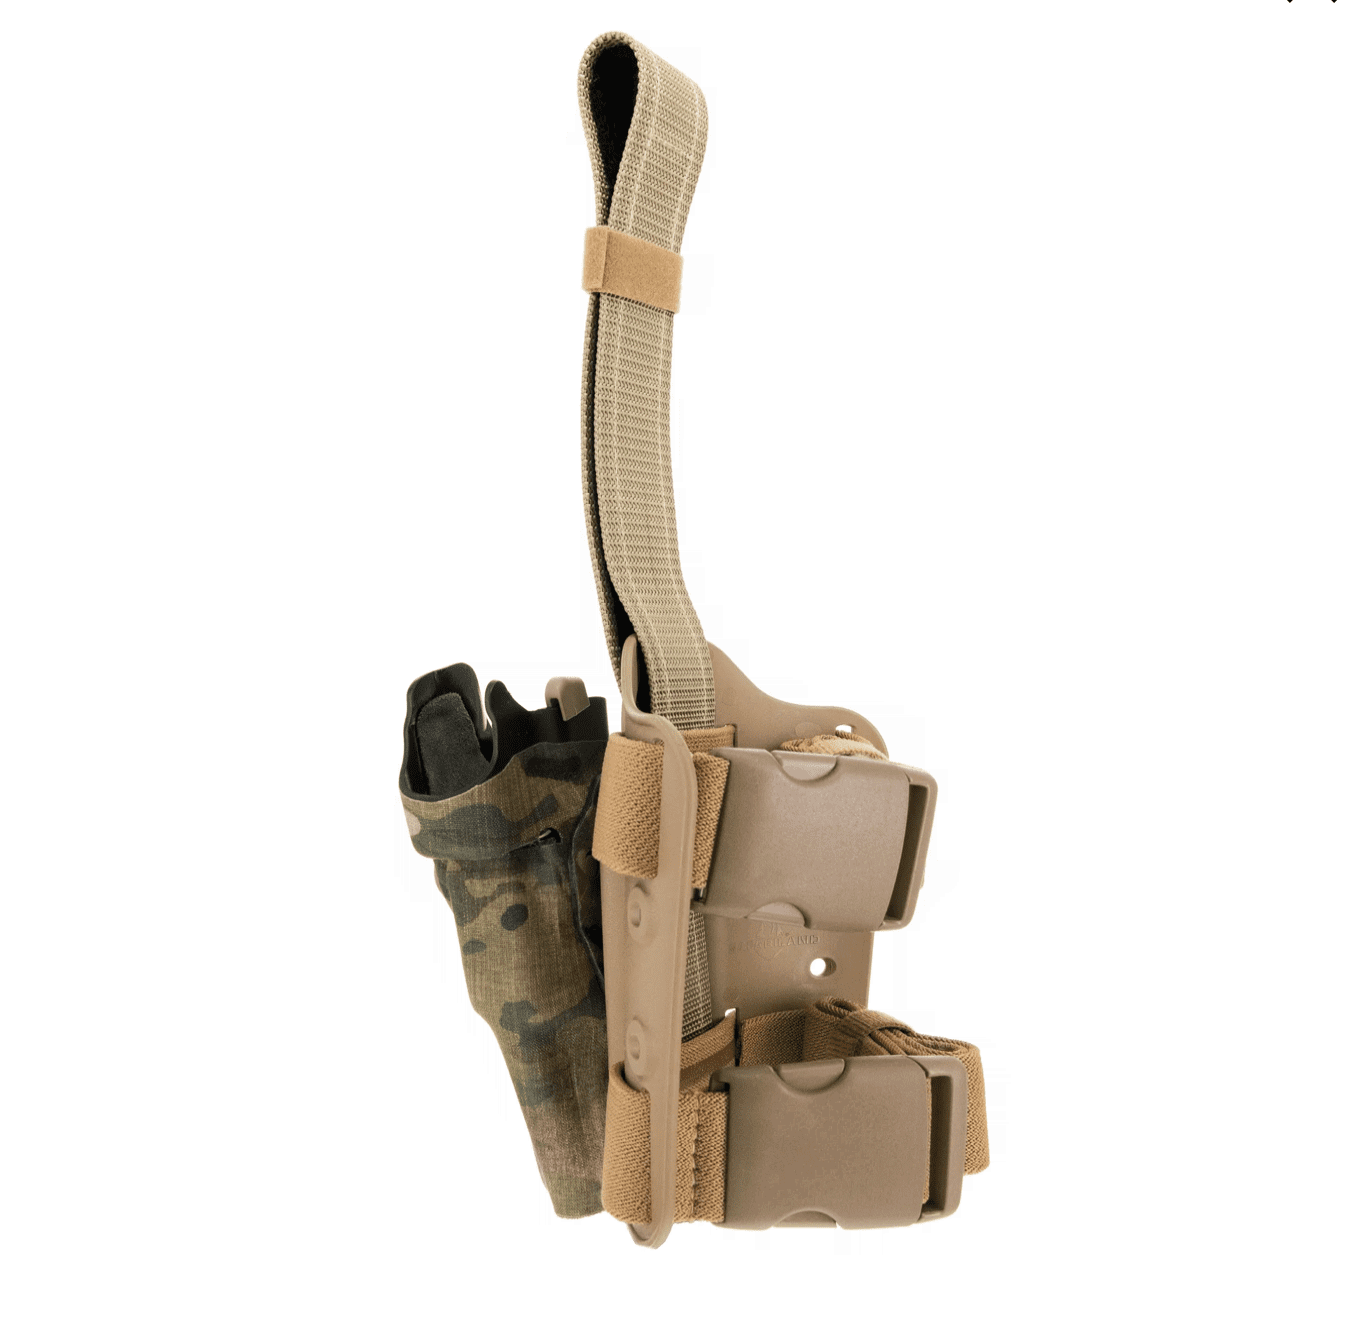 Safariland 6354DO - ALS® Optic Tactical Holster For Red Dot Optic - Tactical & Duty Gear